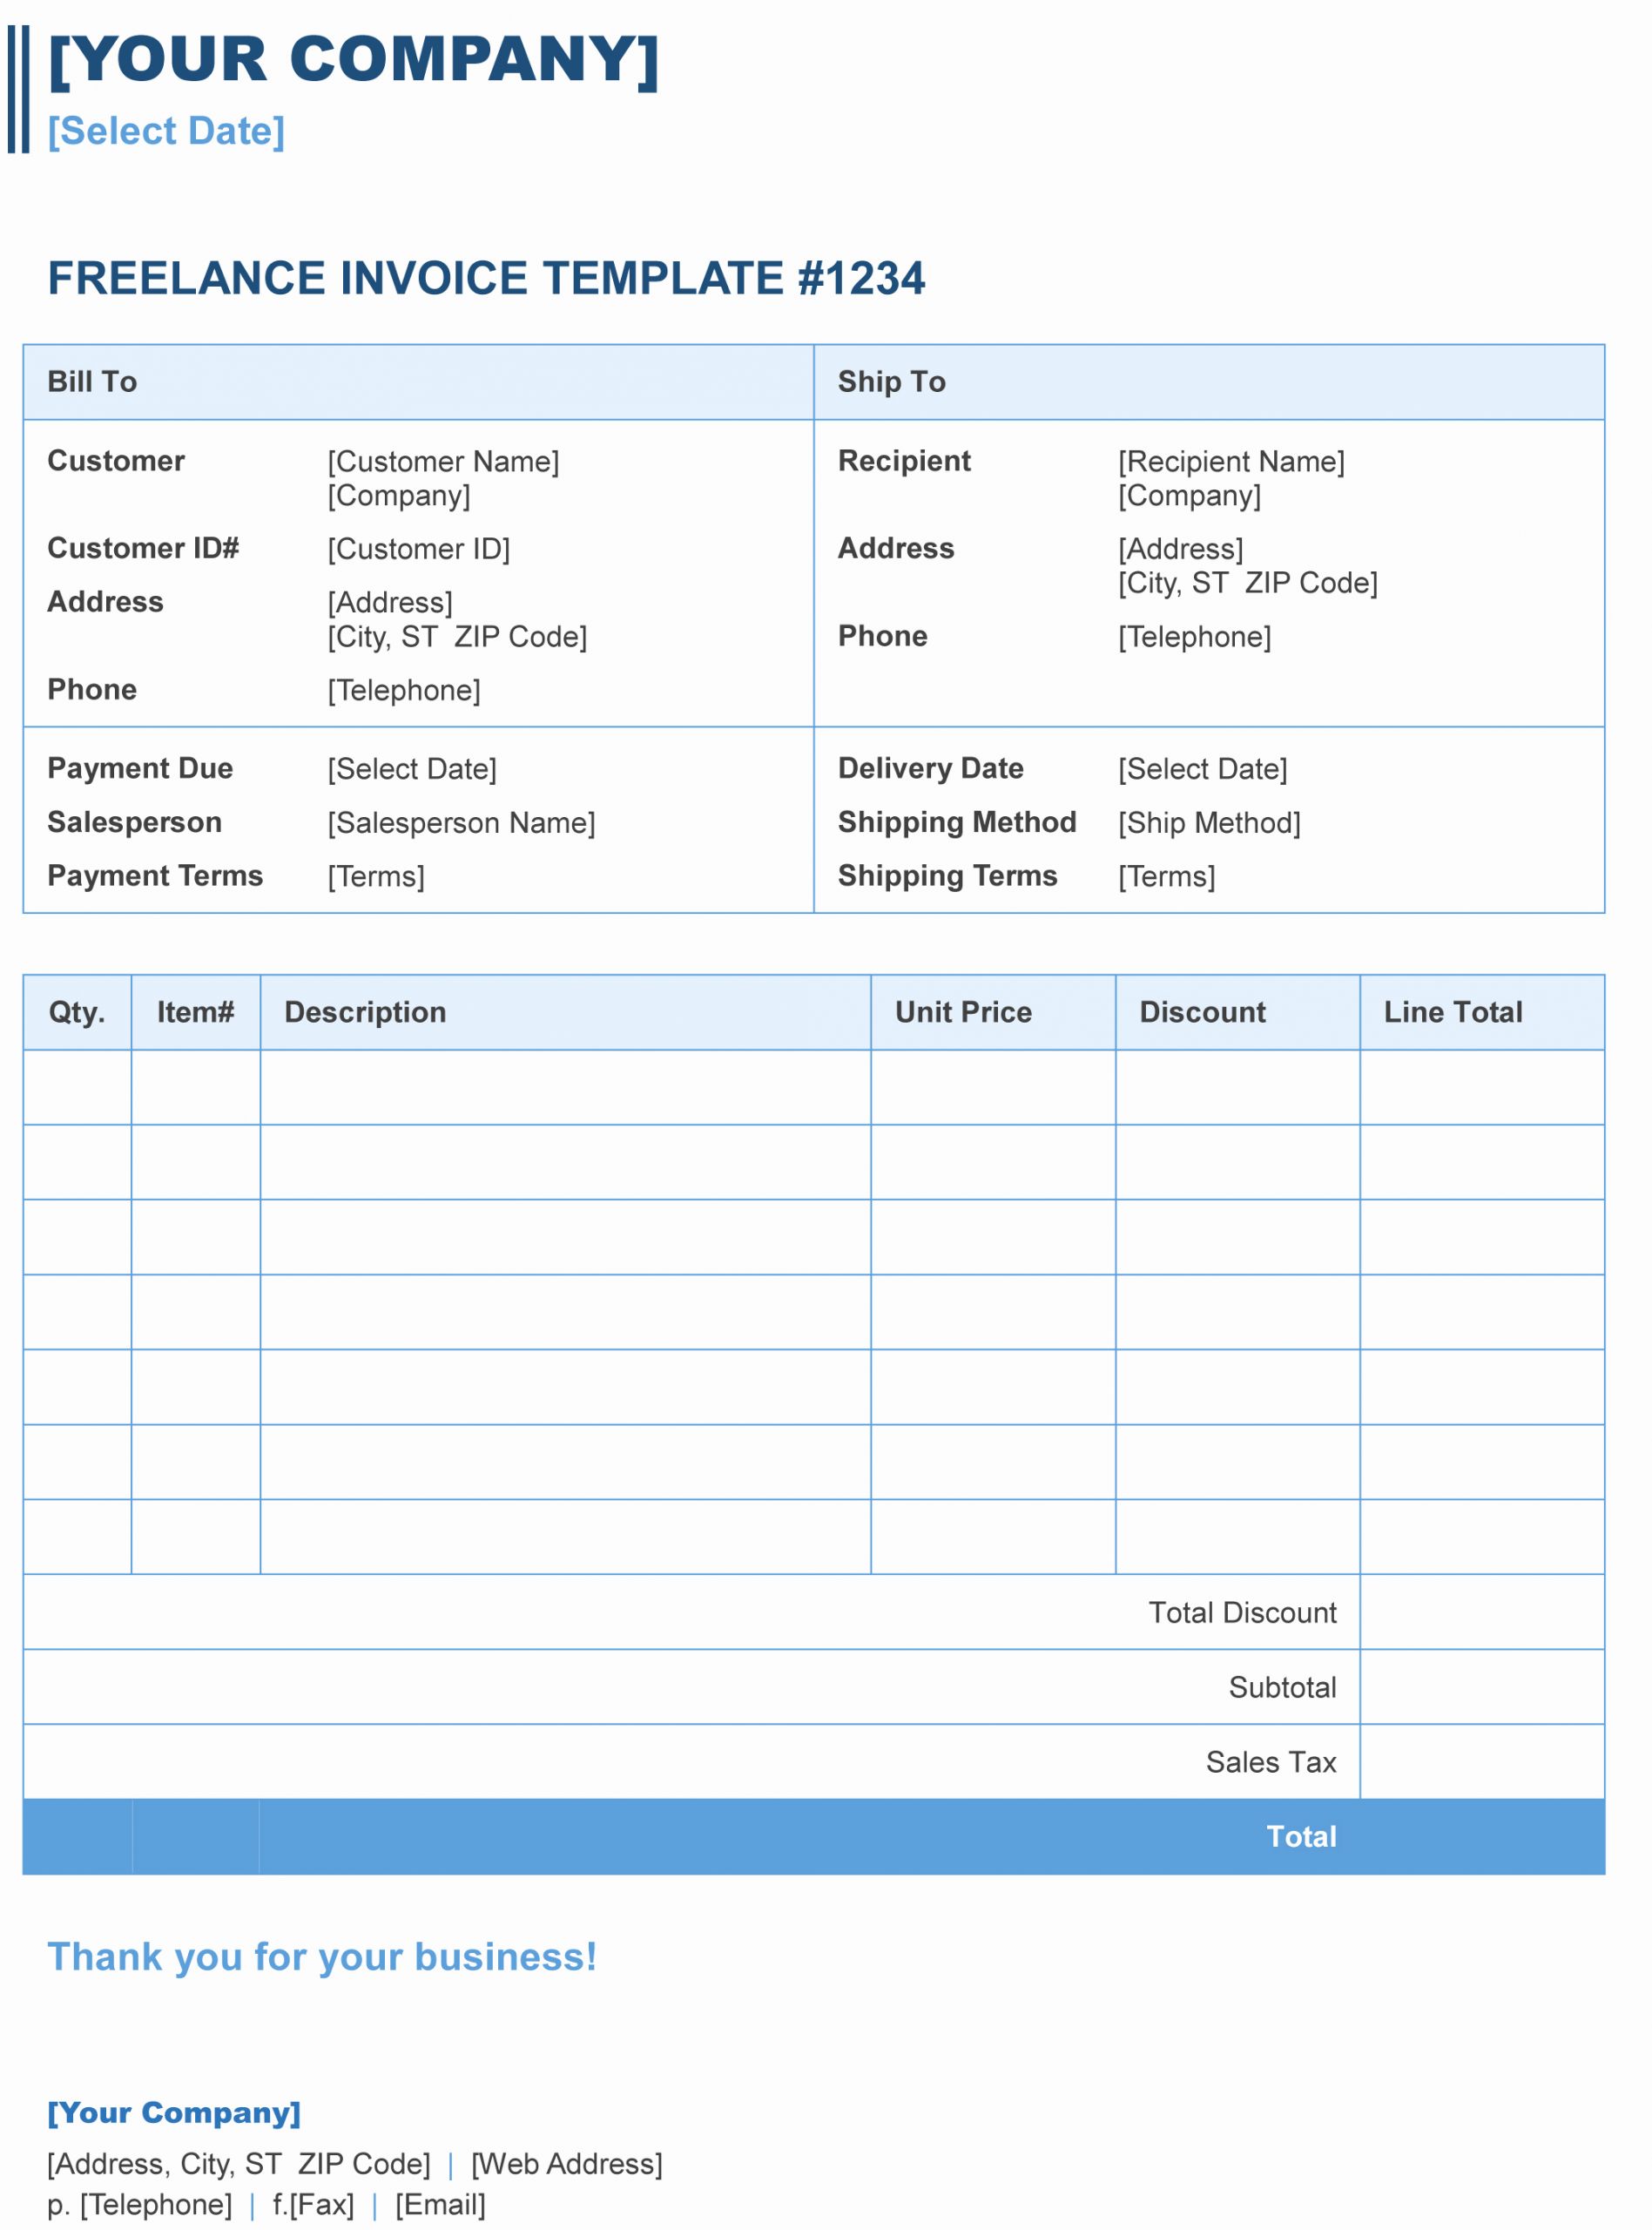 Excel Invoice Template 2003 Best Of Freelance Invoice Template Excel